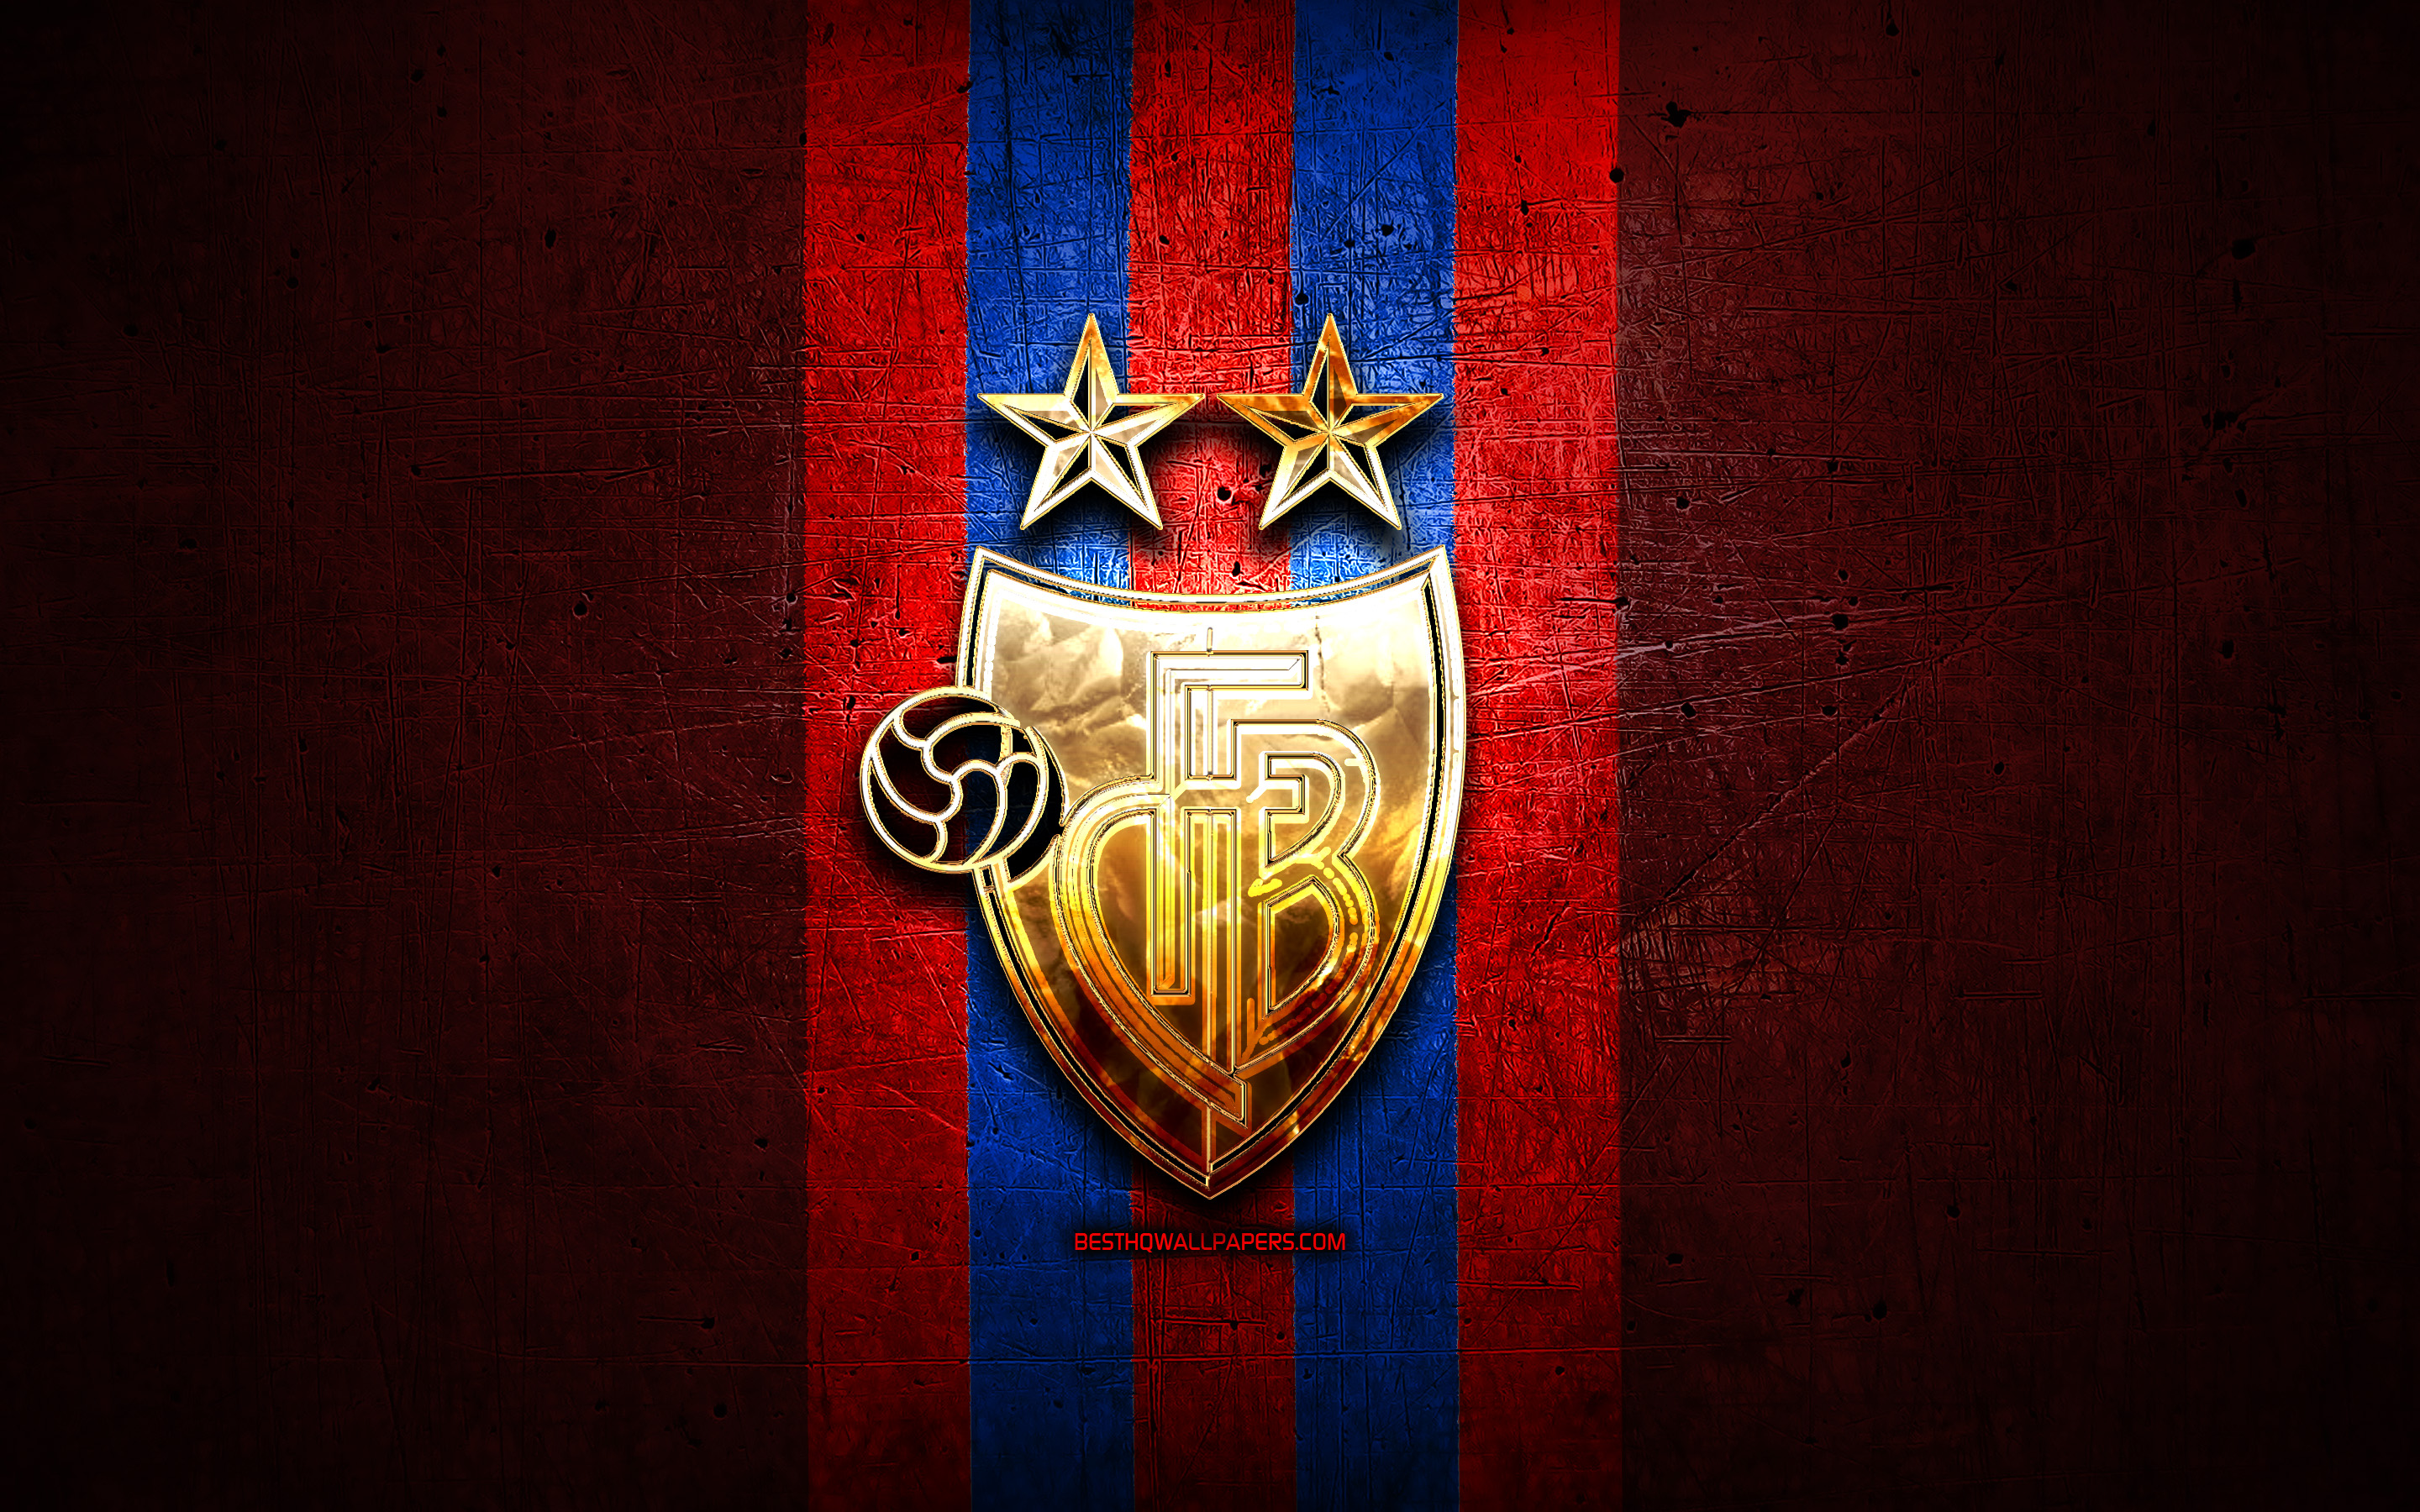 Download wallpaper FC Basel, golden logo, Swiss Super League, red metal background, football, Basel FC, swiss football club, Basel logo, soccer, Switzerland for desktop with resolution 2880x1800. High Quality HD picture wallpaper